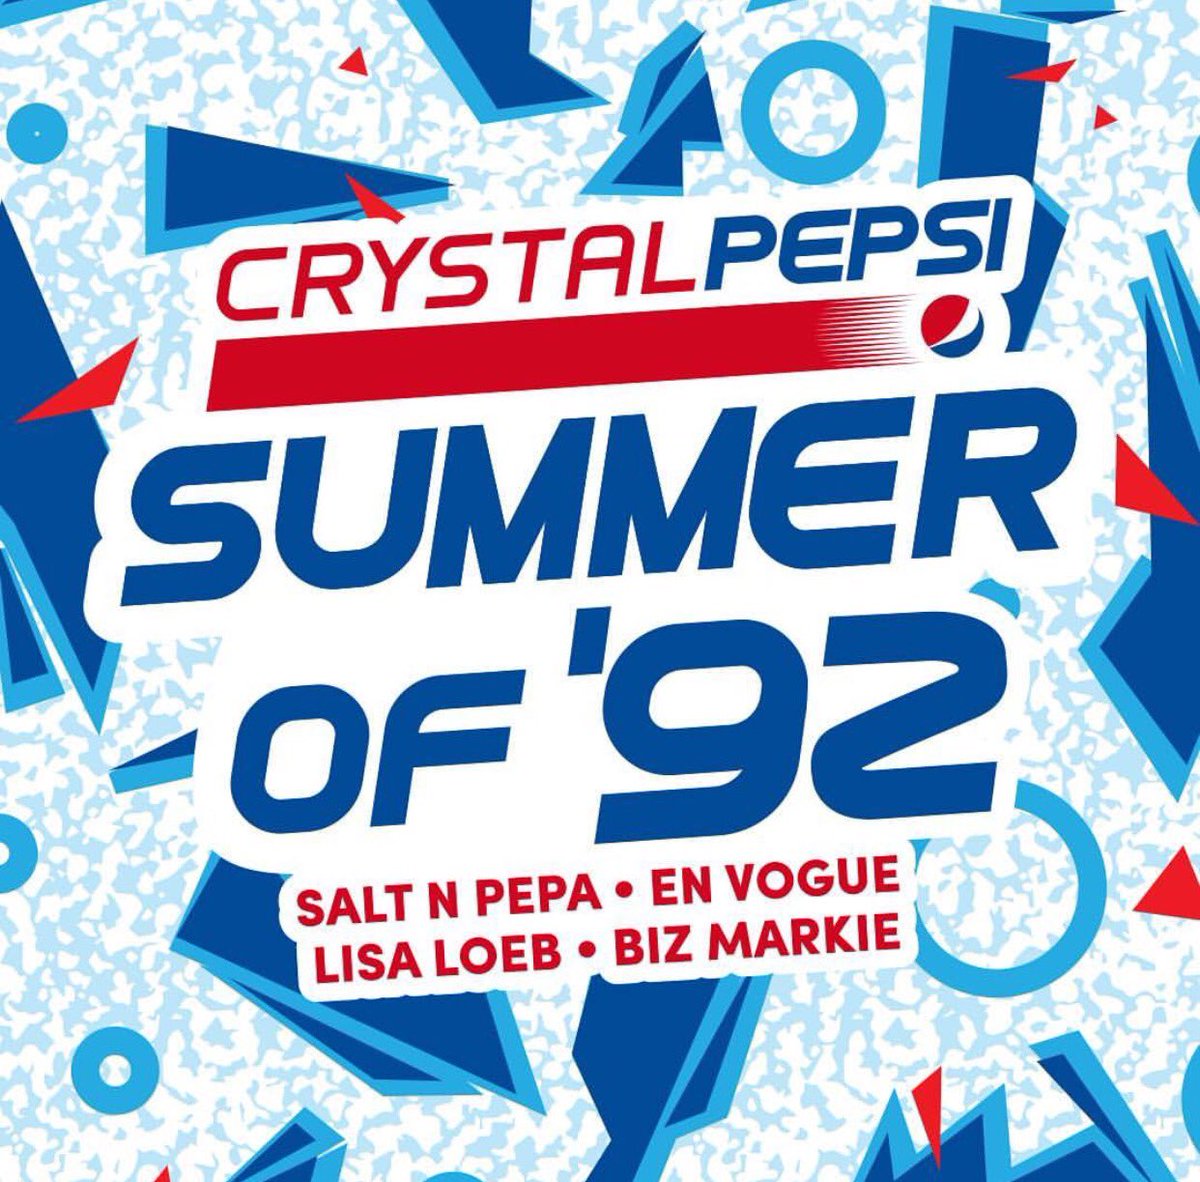 Start practicing your Roger Rabbit ! #CrystalPepsi Summer of '92 hits 8/9 RSVP now! https://t.co/h6UorJBcxg https://t.co/CMTHtTthuE